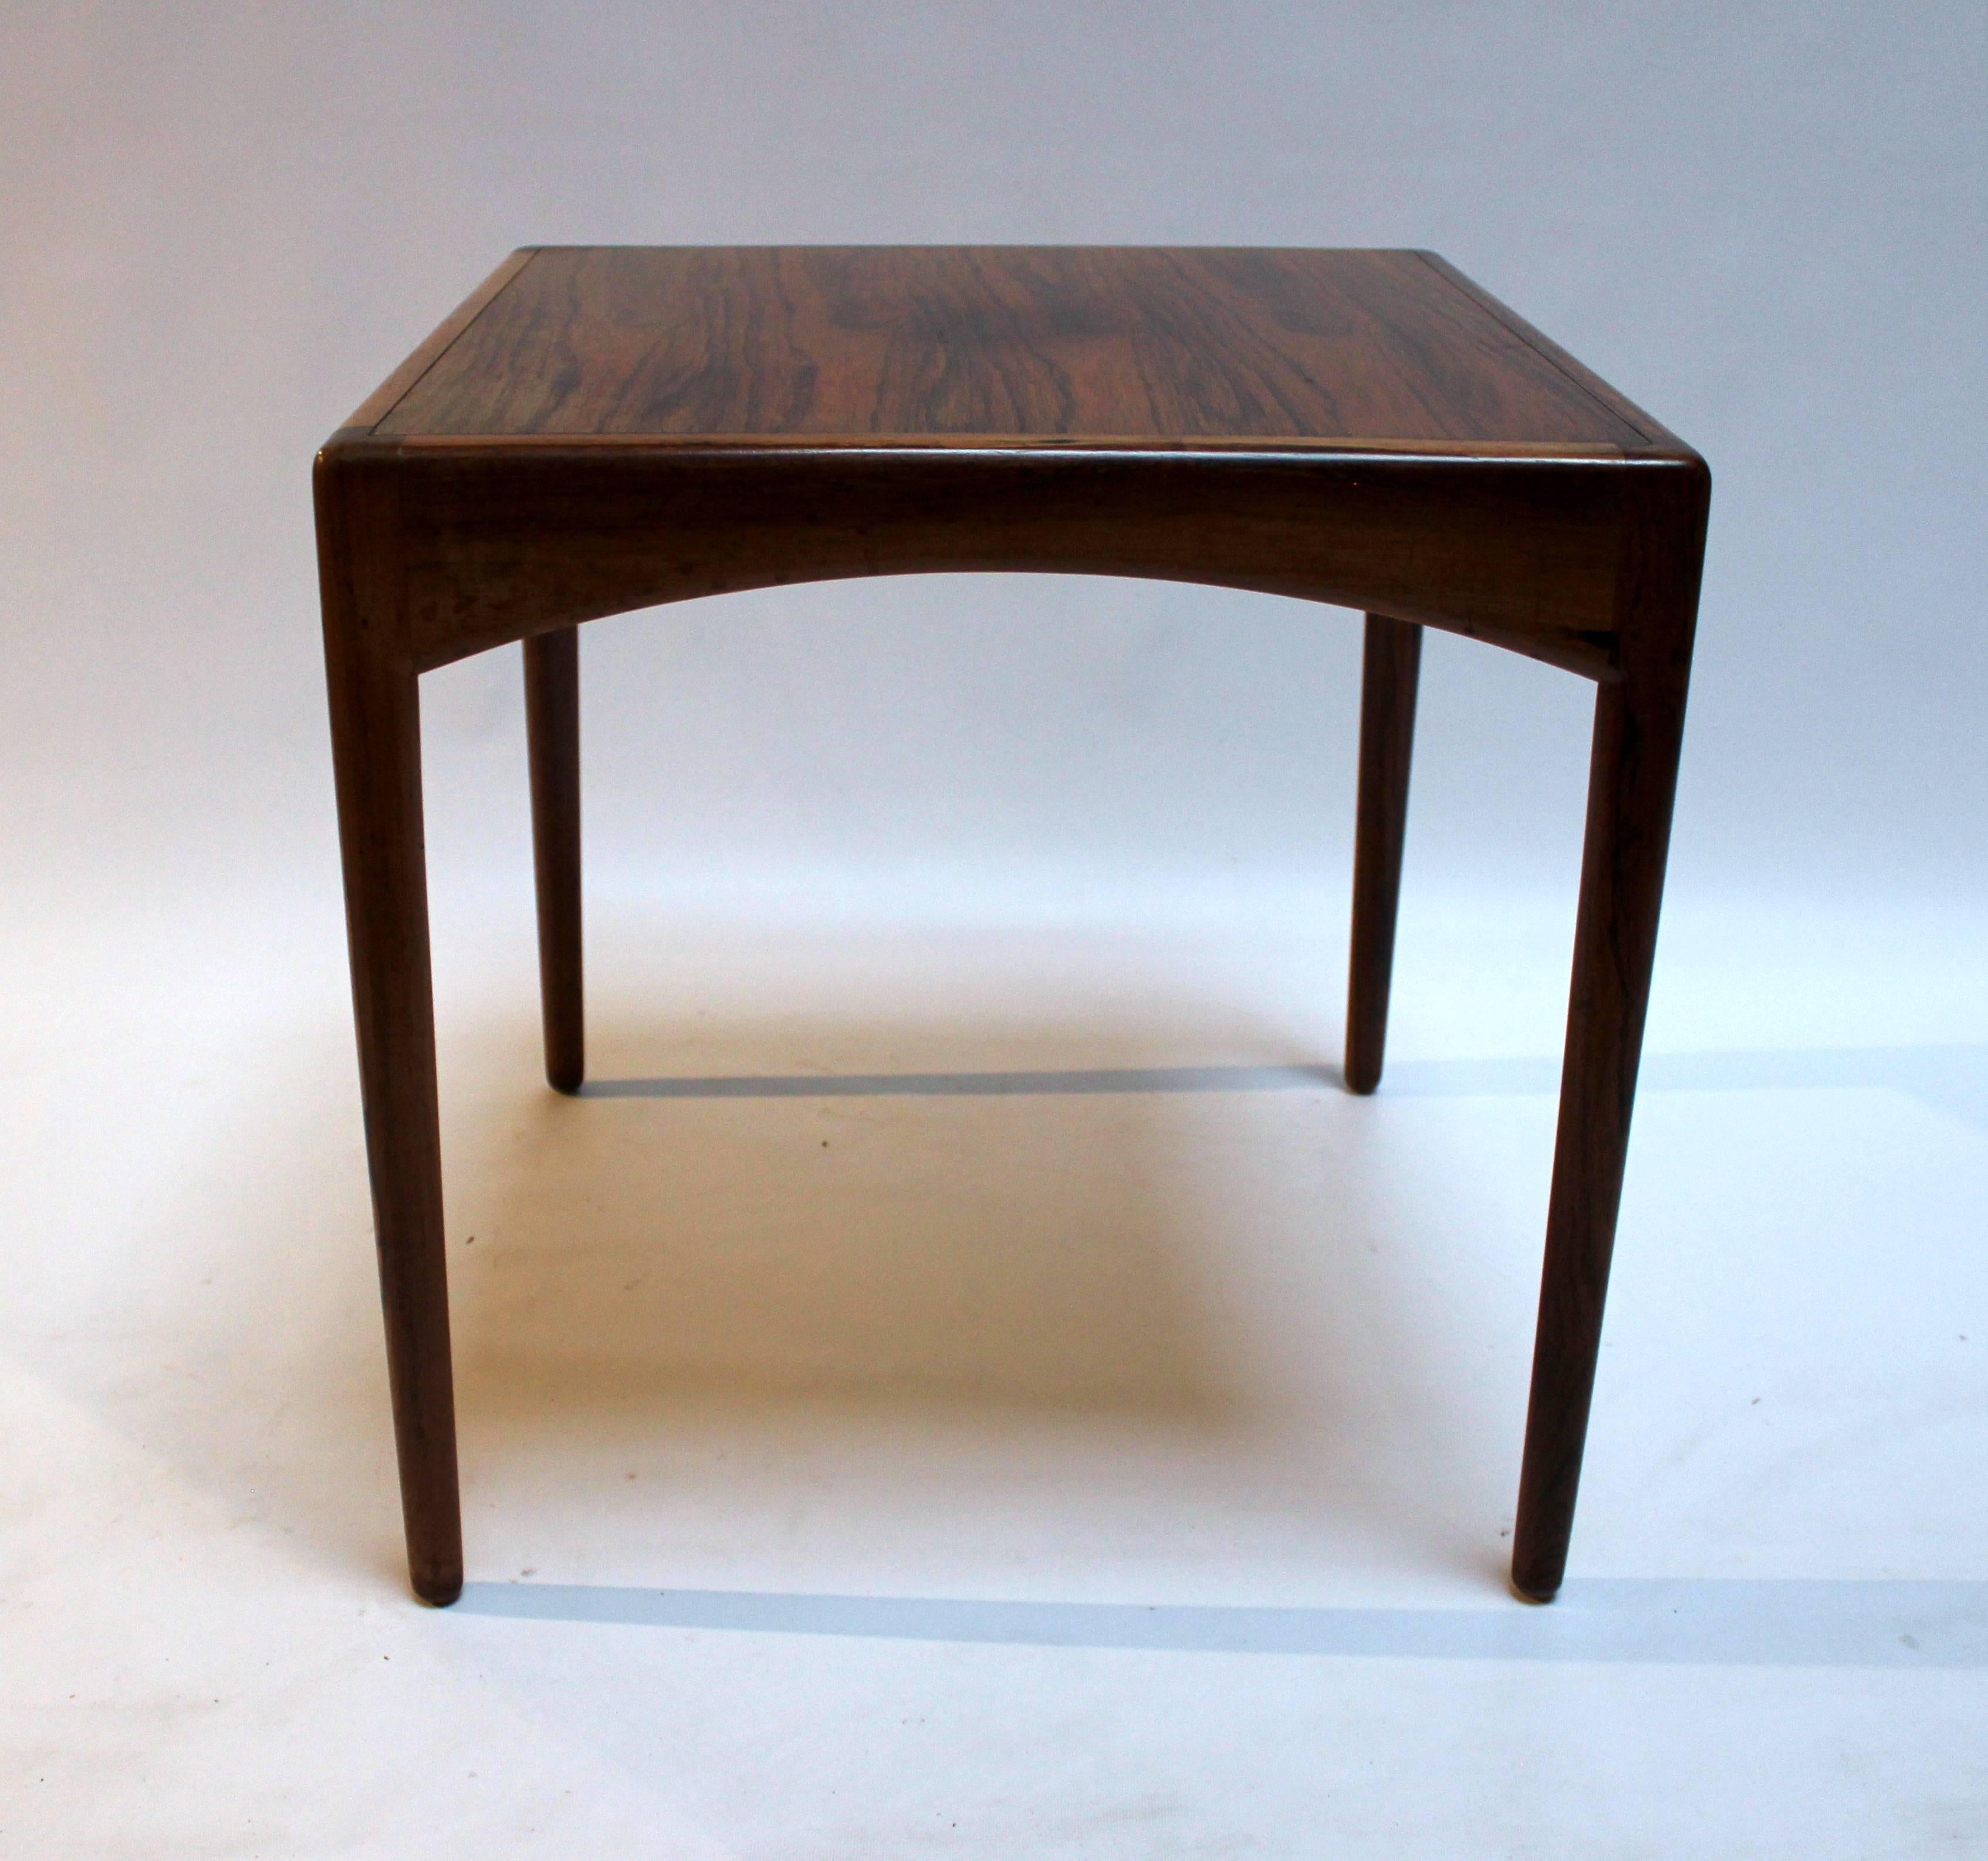 1960s Danish modern rosewood side table by Vejen Polstermøbelfabrik. Table is in good condition with some sun fading. Marked 